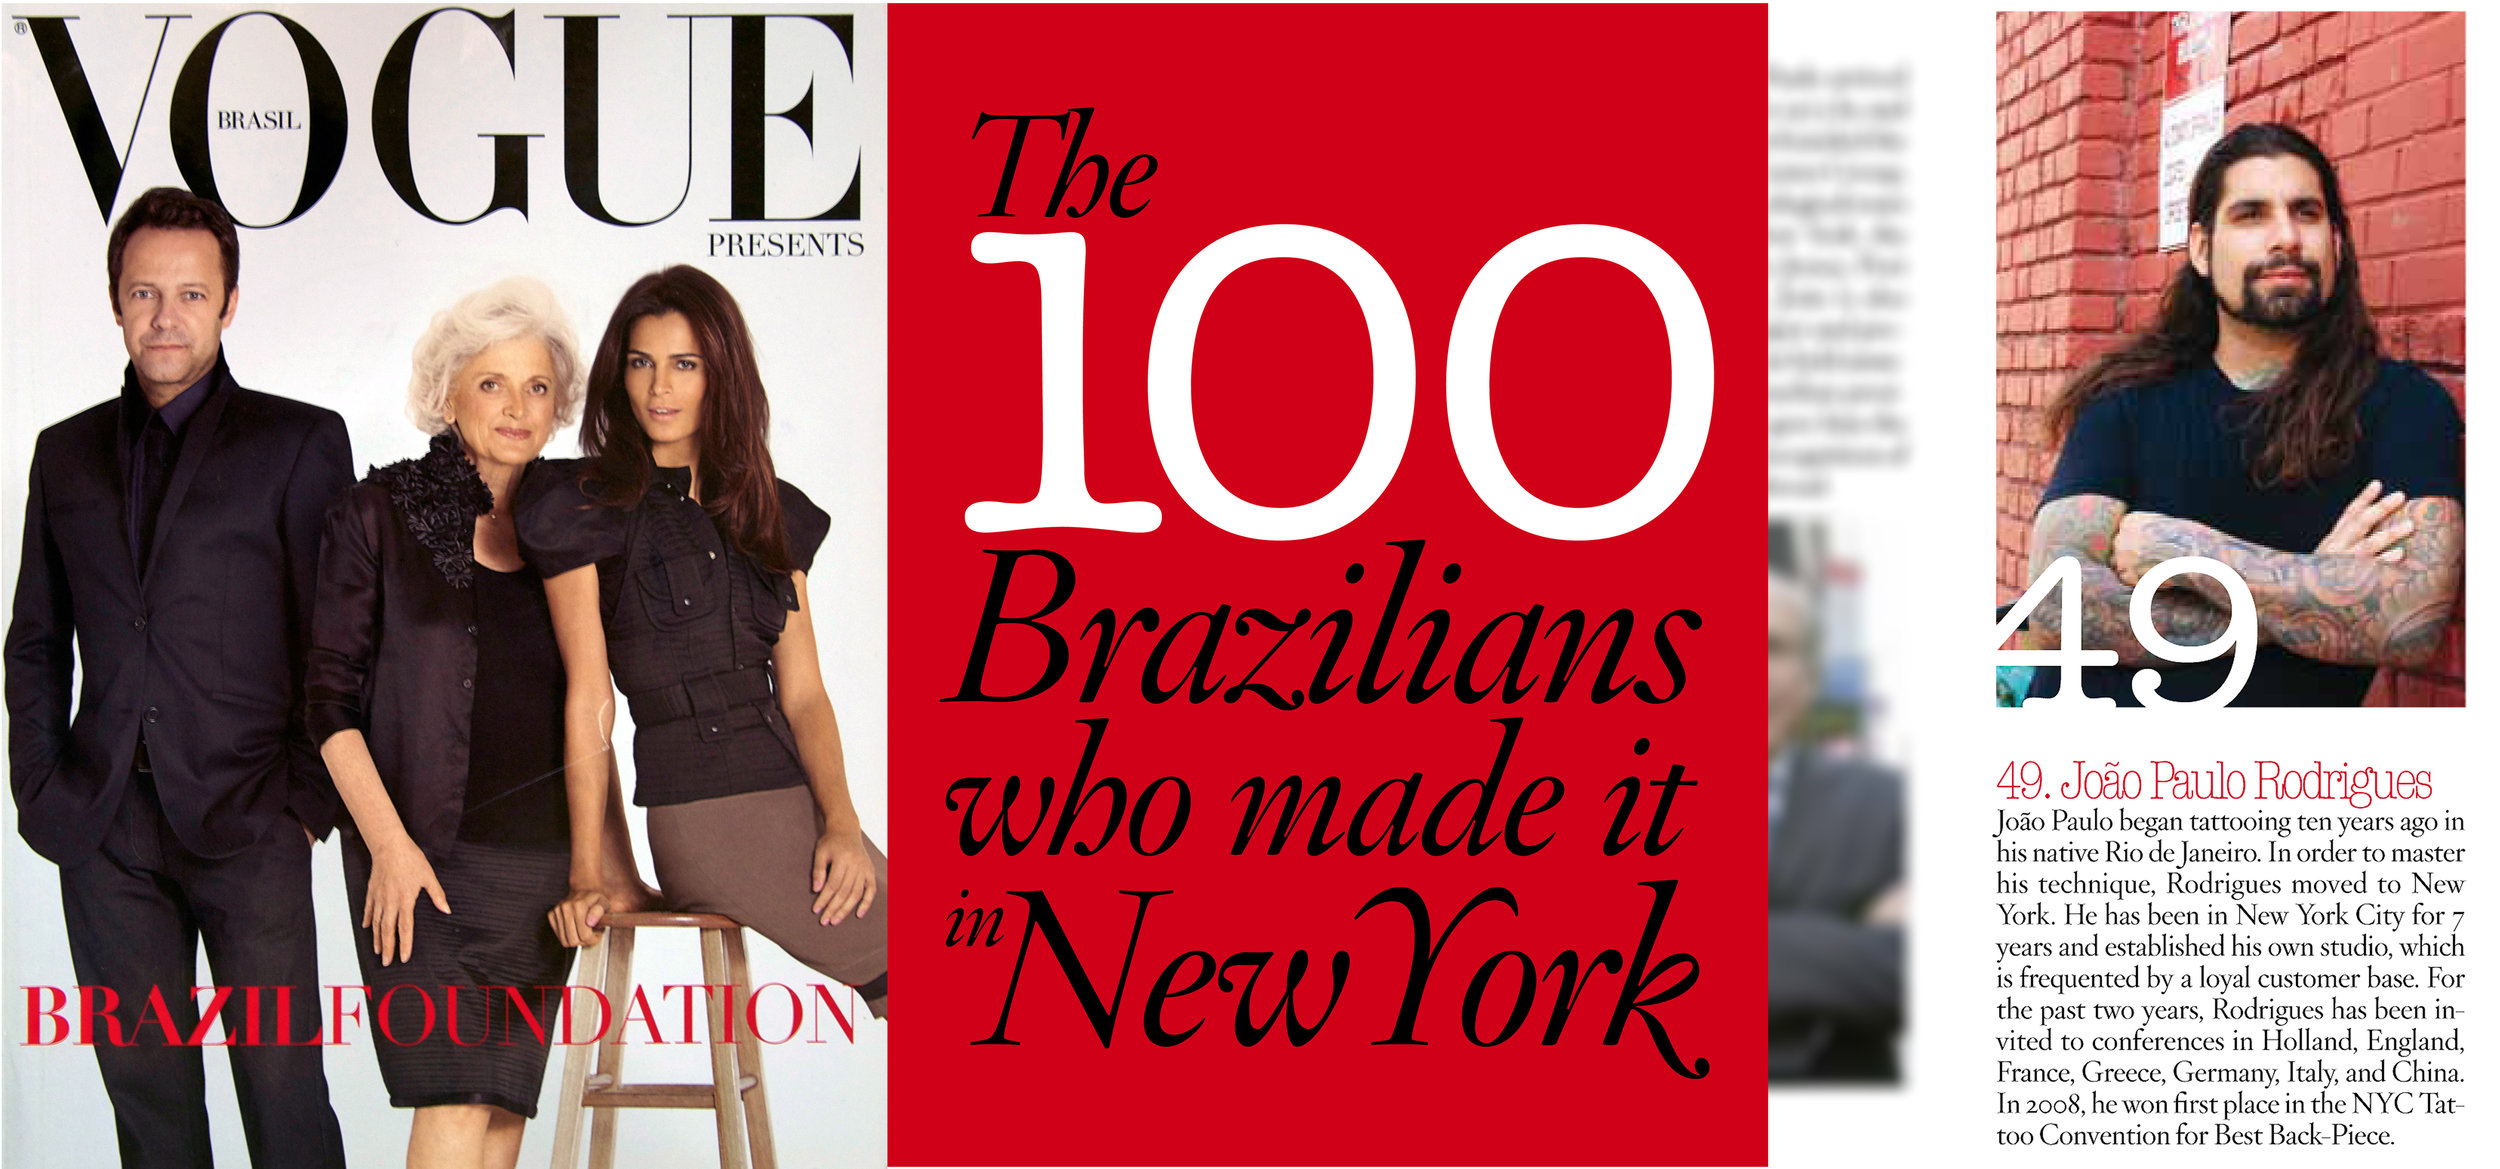 Top 100 Brazilians who made it in New York by Vogue Magazine